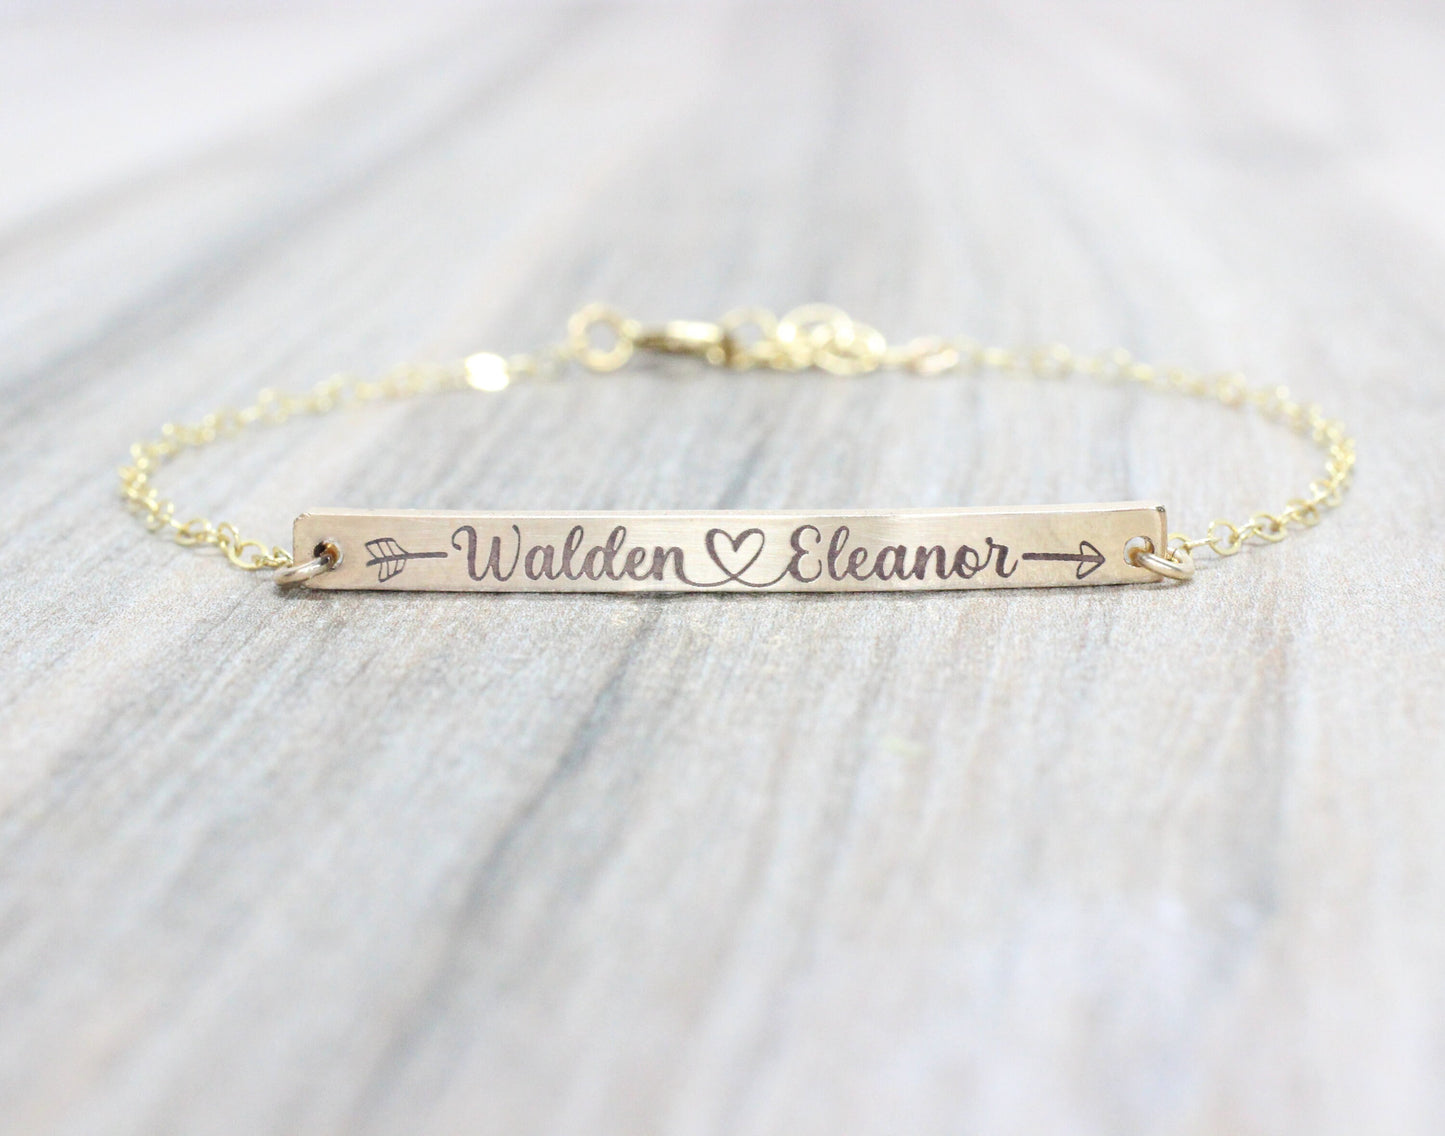 14k Gold Filled Bar Bracelet with Personalized Engraving Names, Dates, Roman Numerals, Initials Gold Filled or Sterling Silver Gifts For Her